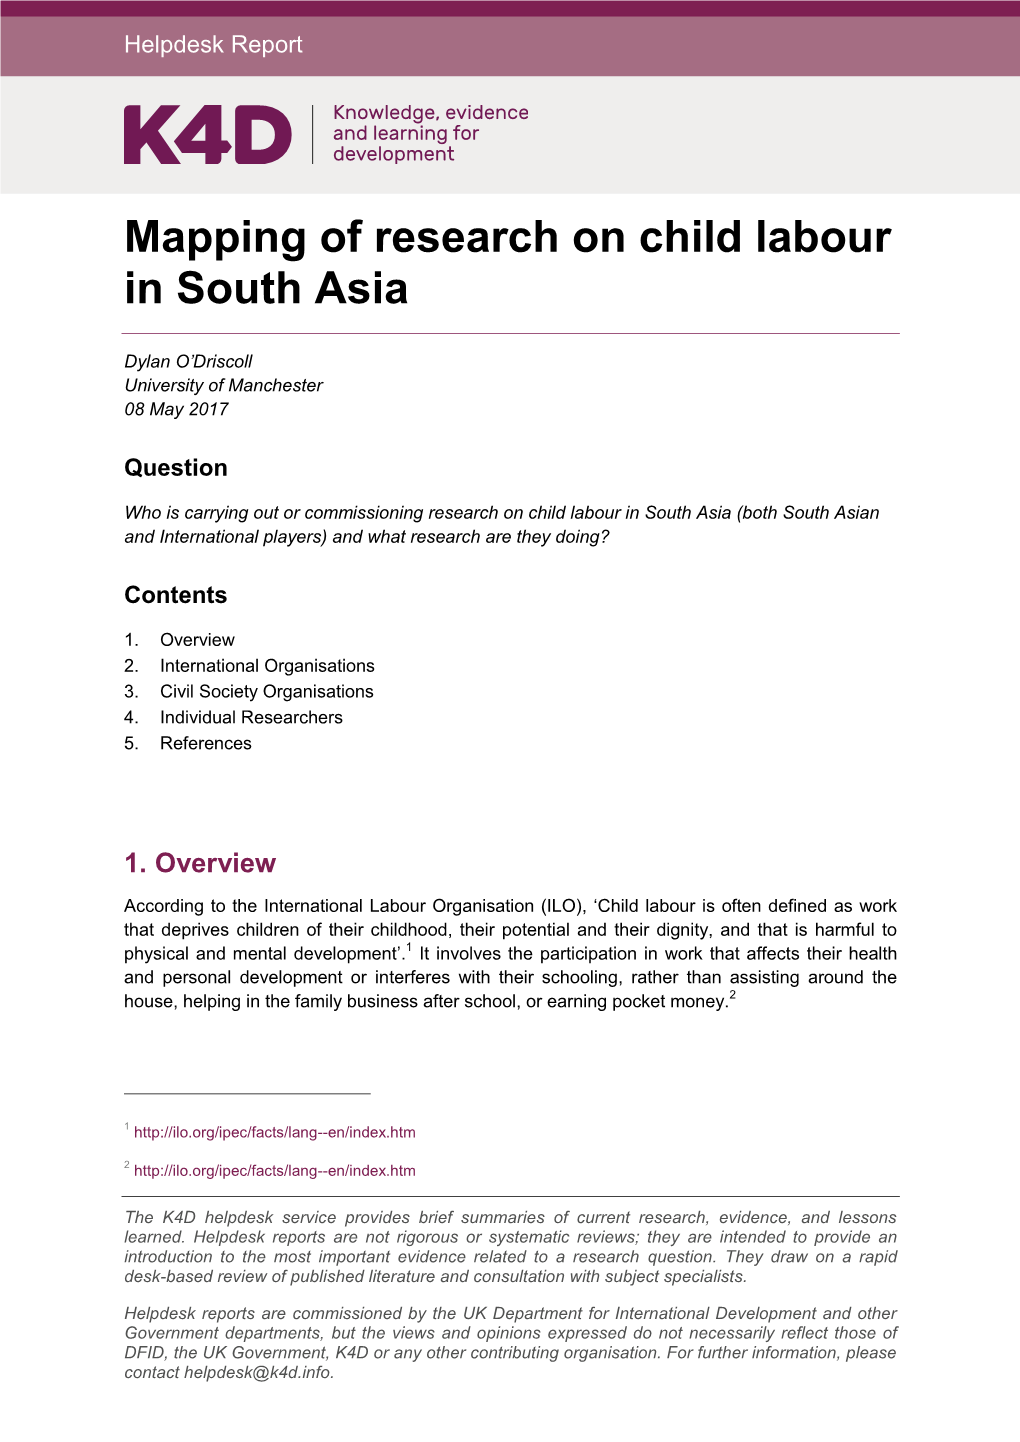 Mapping of Research on Child Labour in South Asia